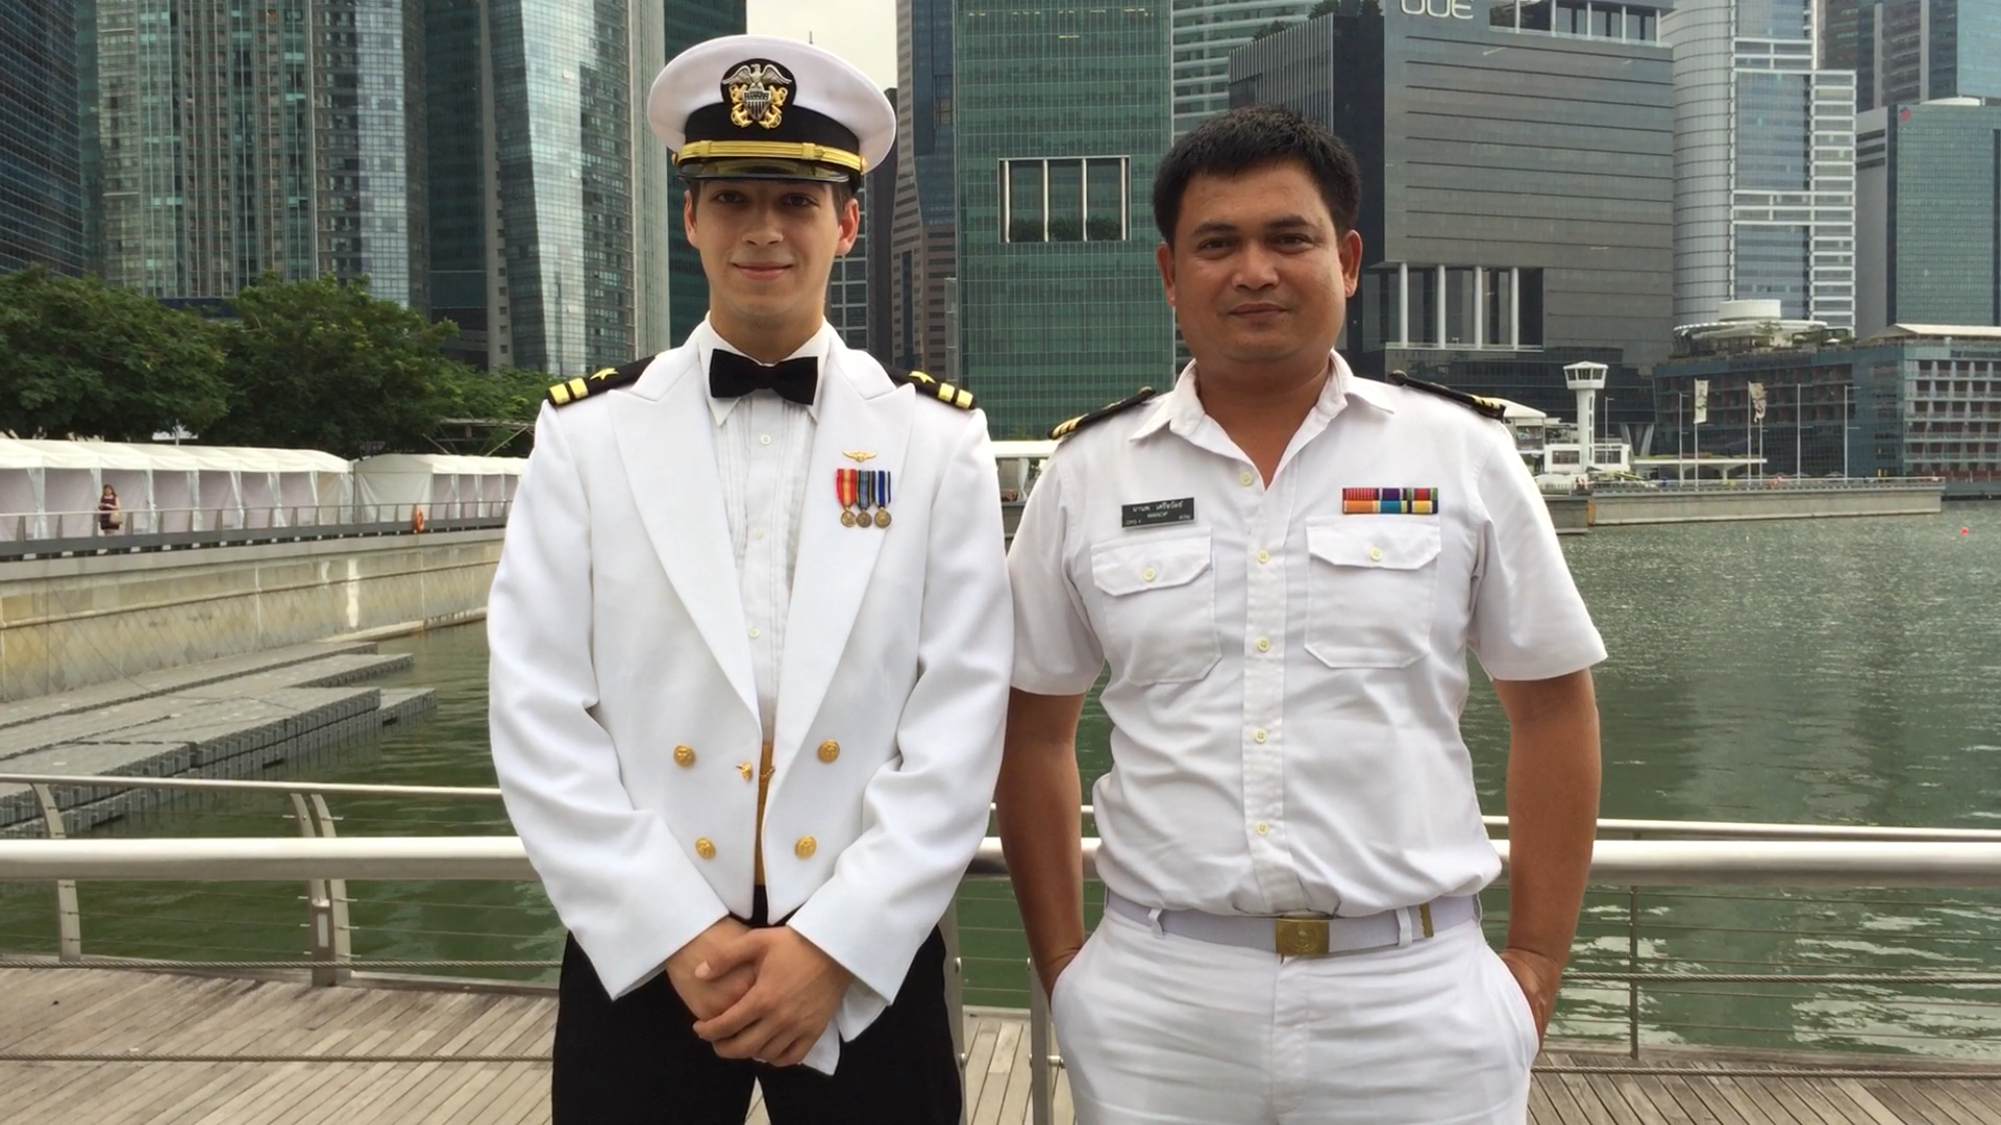 LT Jonas Lauwiner with a Thai Chief Petty Officer First Class in Singapore.jpg